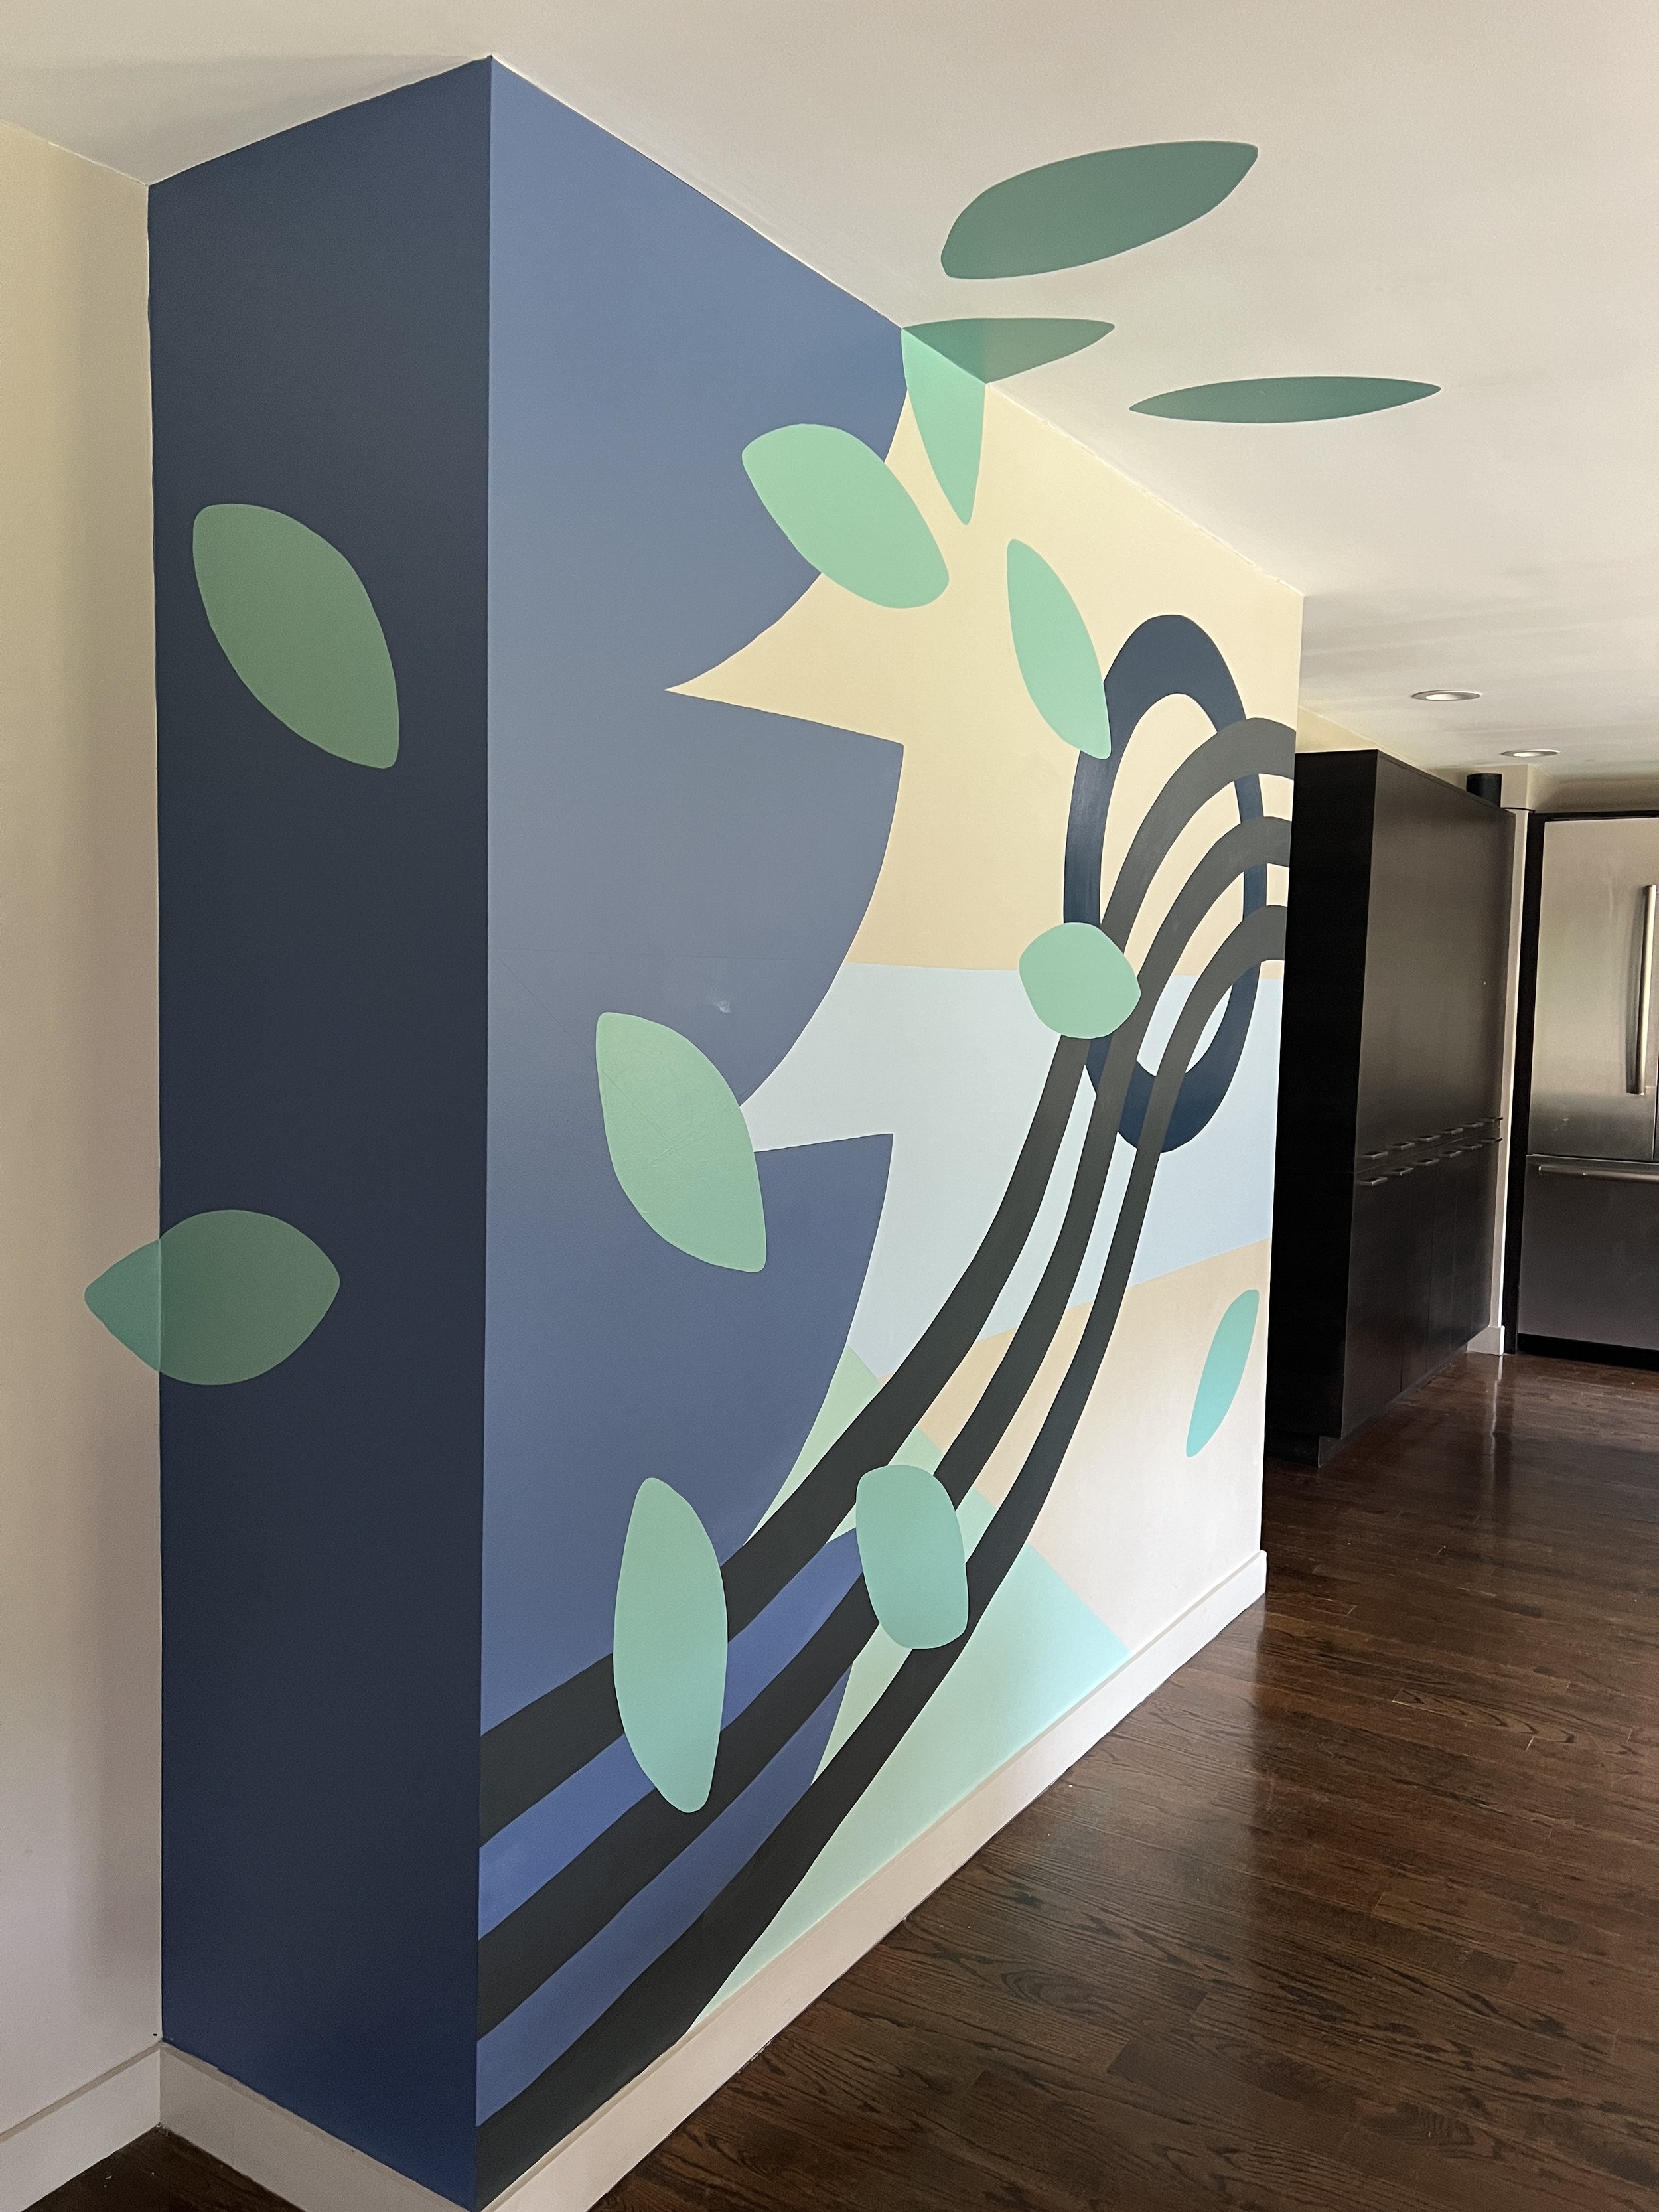  Commissioned mural for a private residential client in Falmouth, ME. This piece was designed and painted by hand in August 2022. 